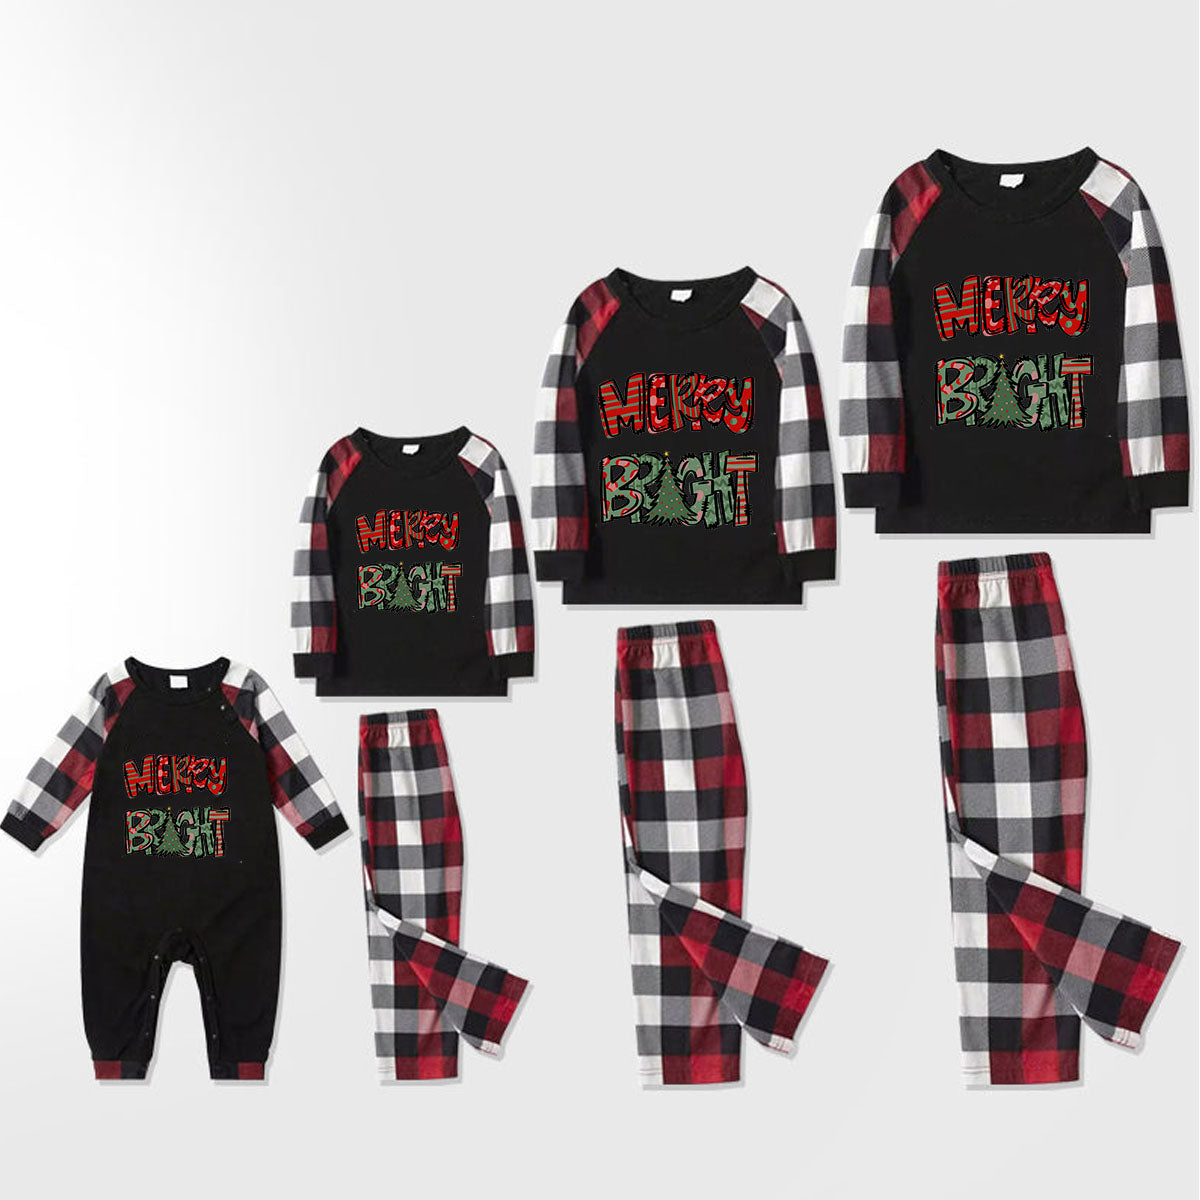 Christmas Cute Cartoon Christmas Tree and 'MERRY BRIGHT' Letter Print Contrast Tops and Red & Black & White Plaid Pants Family Matching Pajamas Set With Dog Bandana